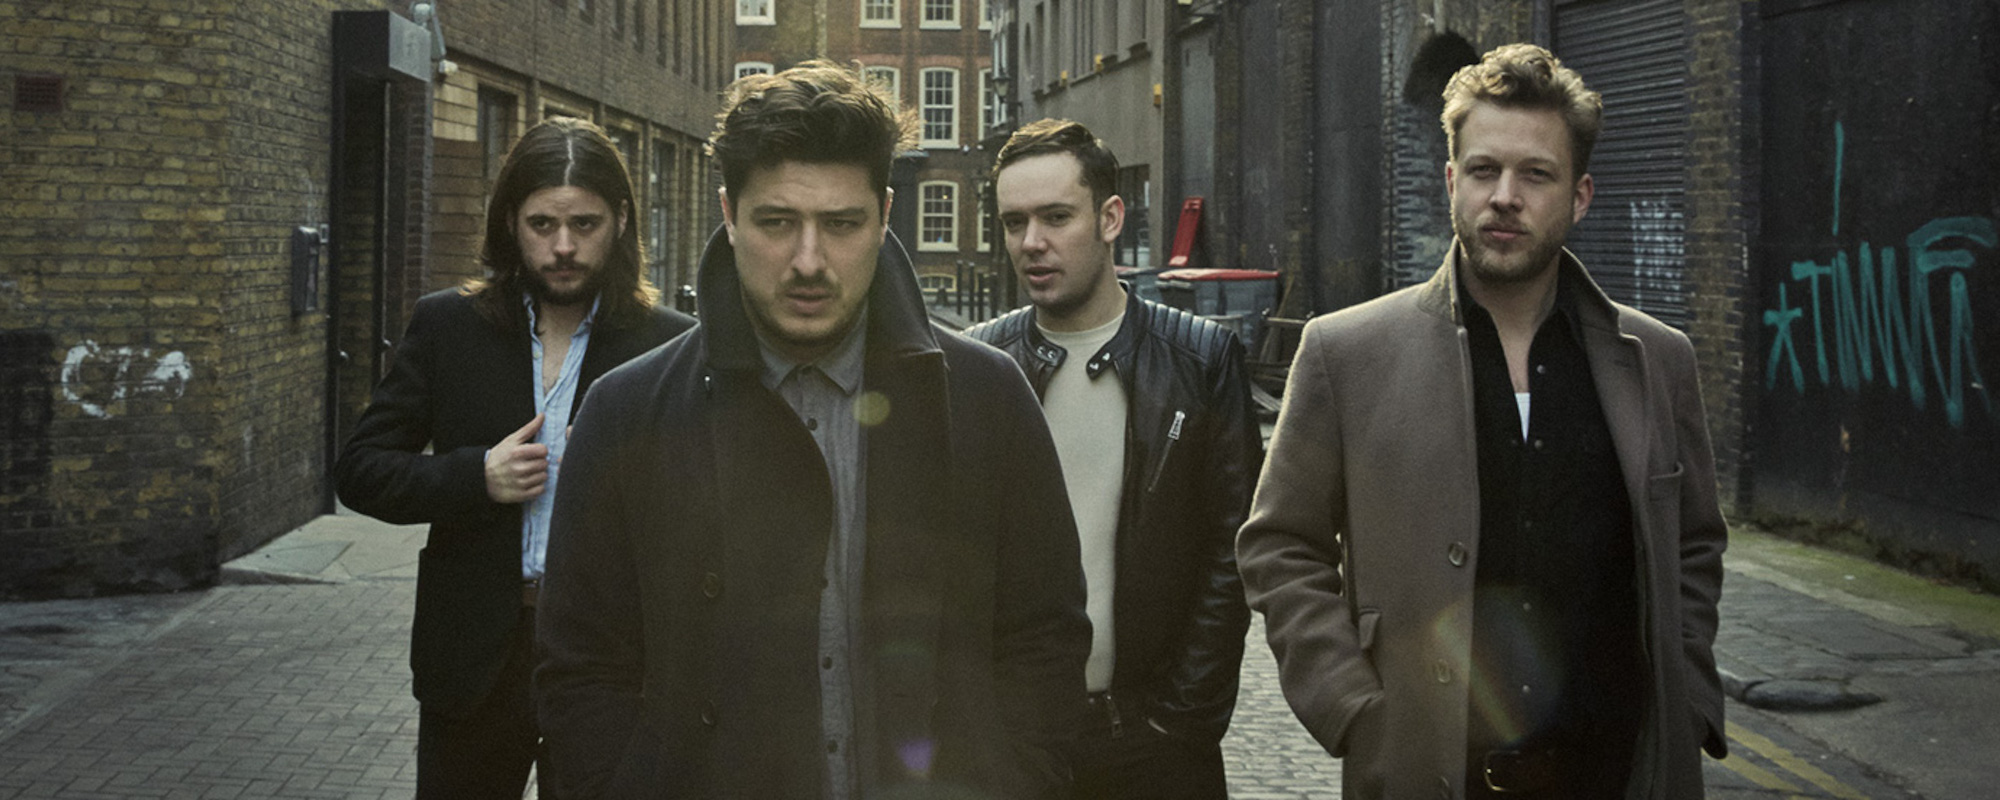 The Top 10 Mumford & Sons Songs